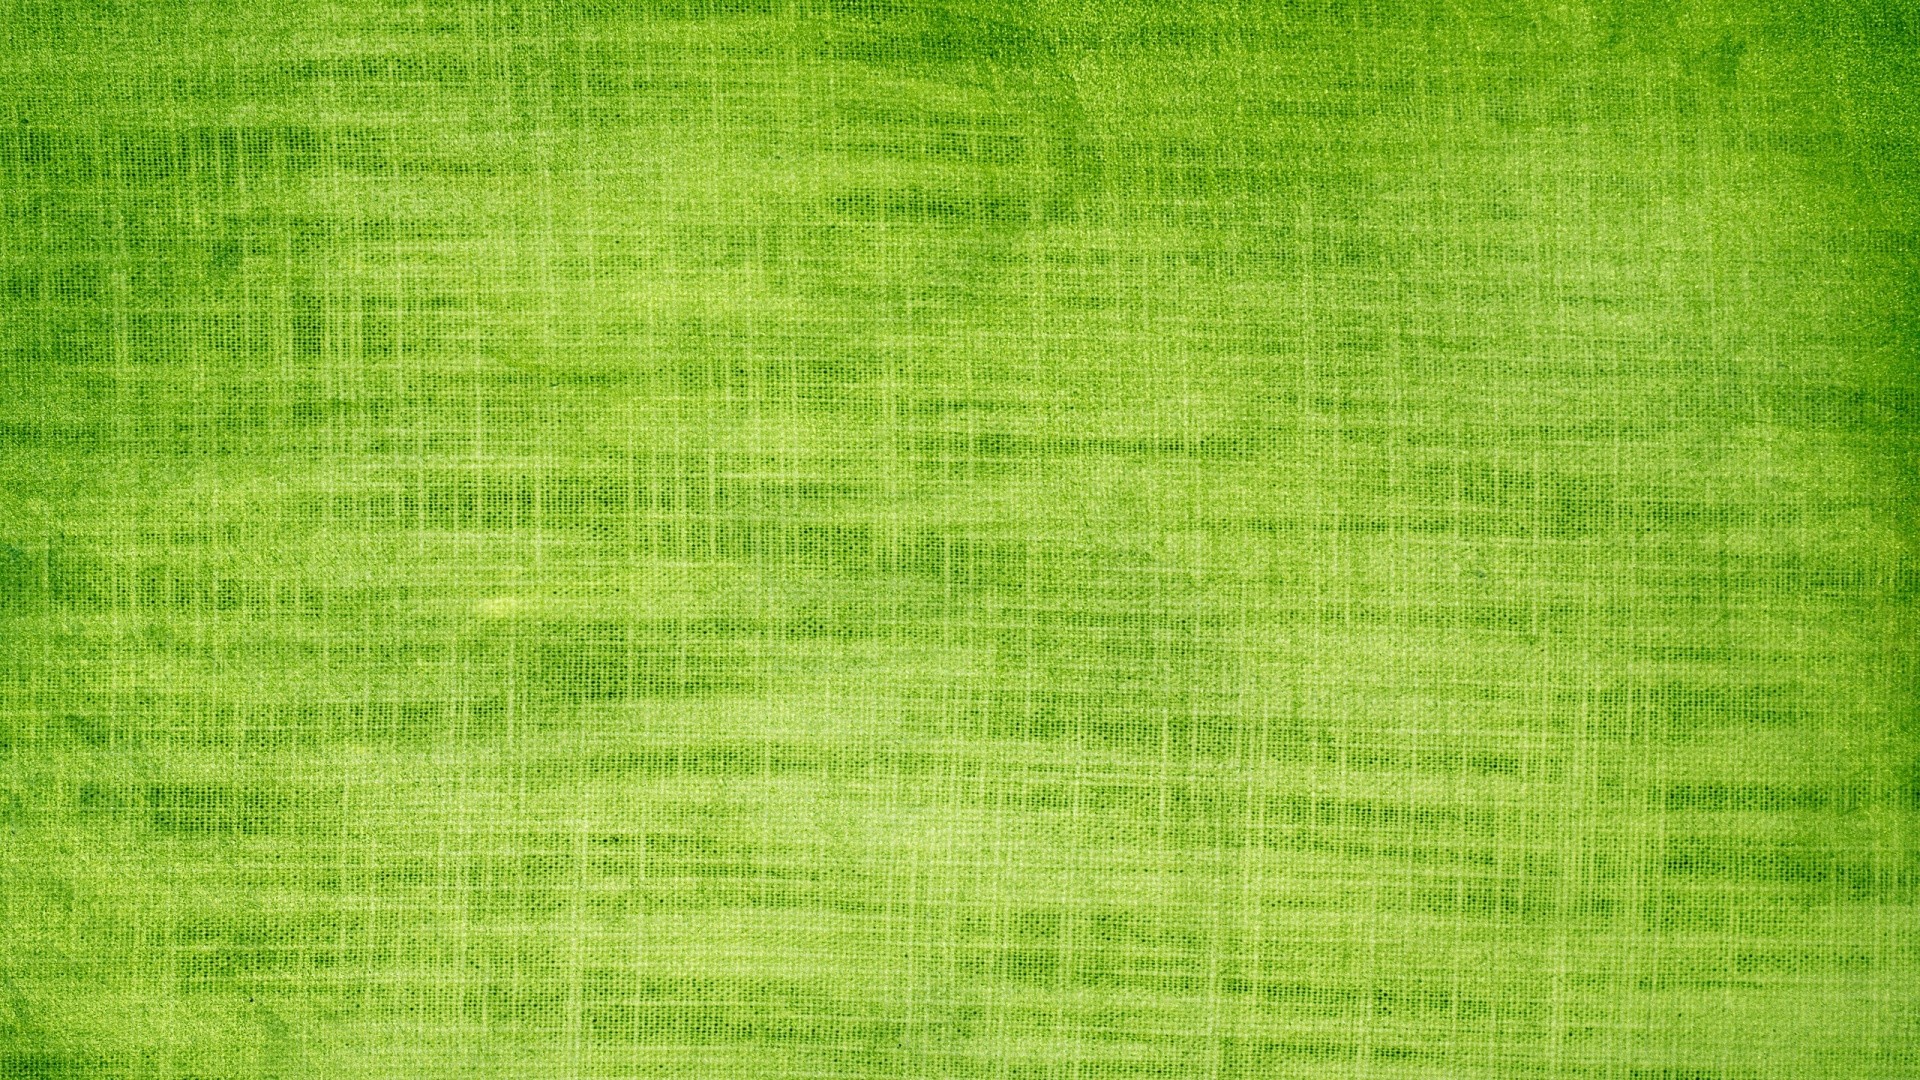 1920x1080  Green Fabric Texture. How to set wallpaper on your desktop? Click  the download link from above and set the wallpaper on the desktop from your  OS.